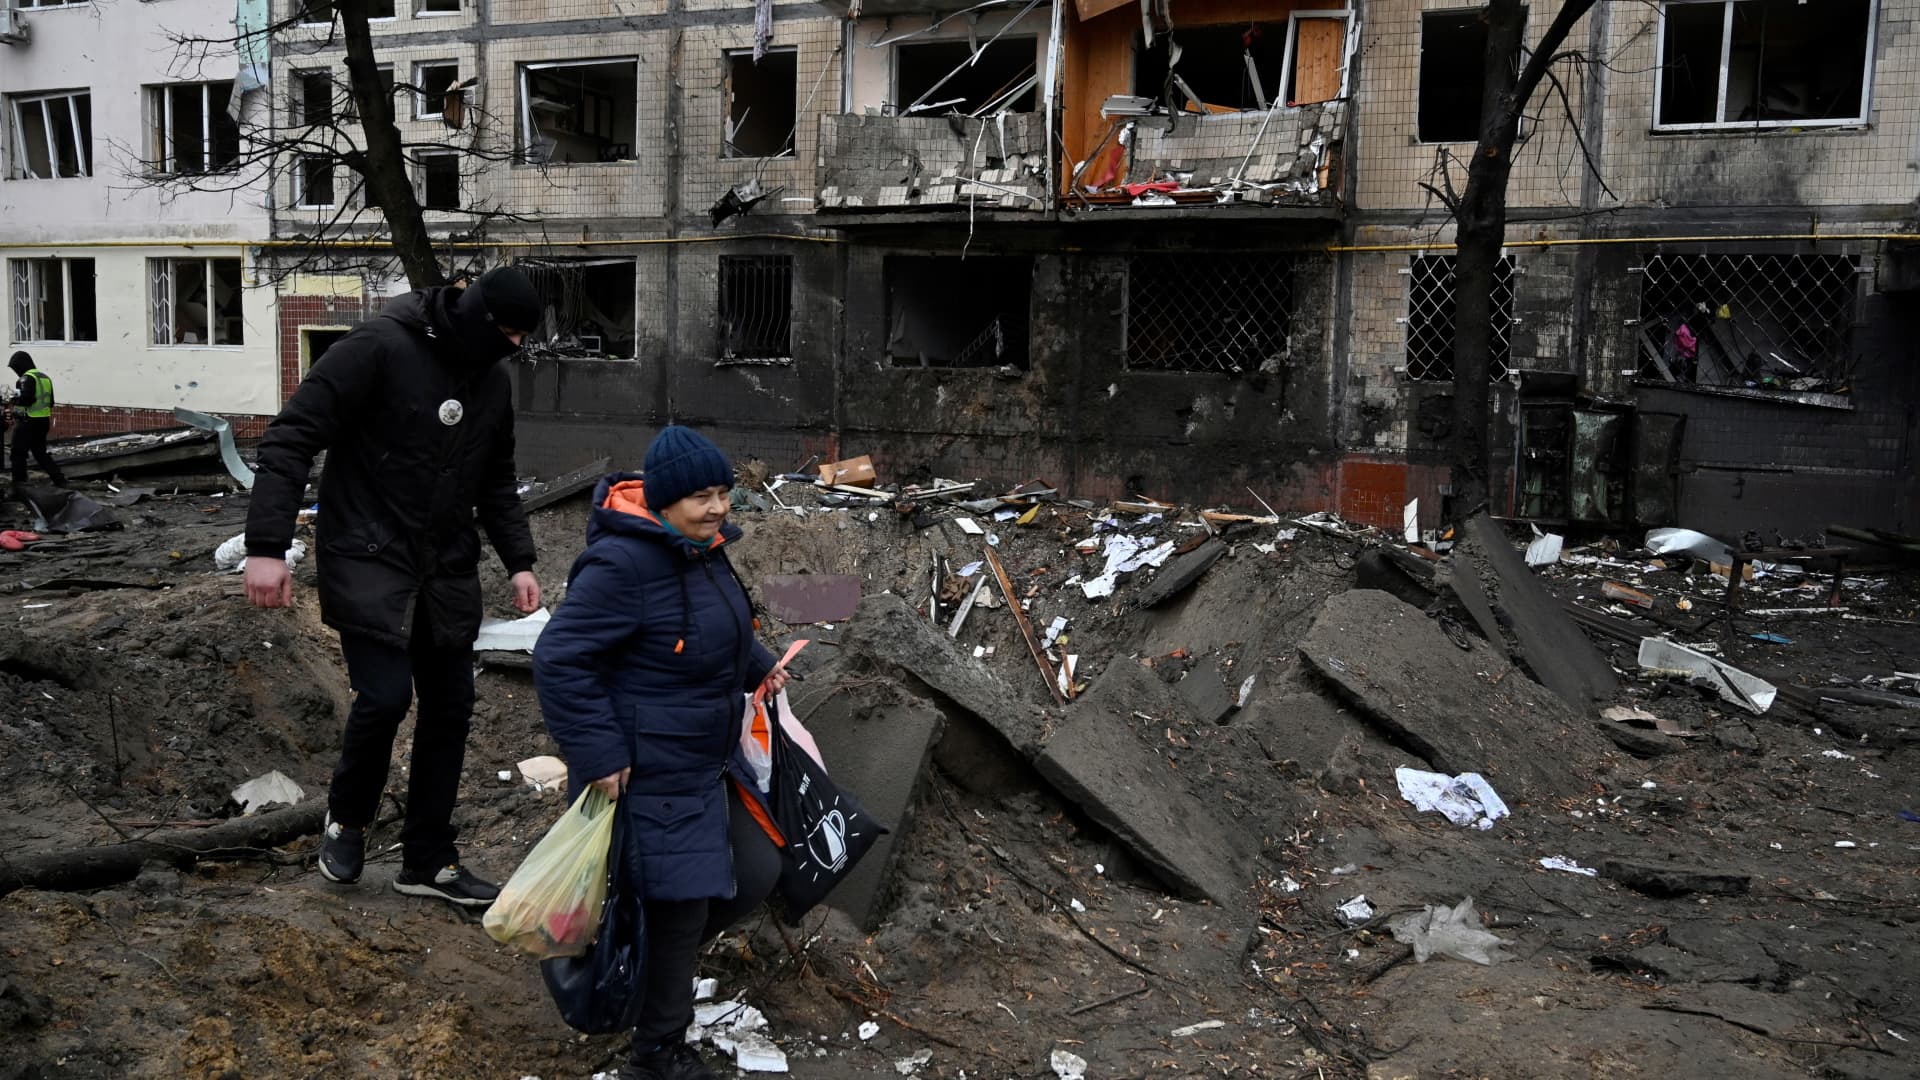 People walk past a damaged residential building following a missile strike in Kyiv on December 13, 2023, amid Russian invasion of Ukraine. (Photo by SERGEI CHUZAVKOV / AFP) (Photo by SERGEI CHUZAVKOV/AFP via Getty Images)